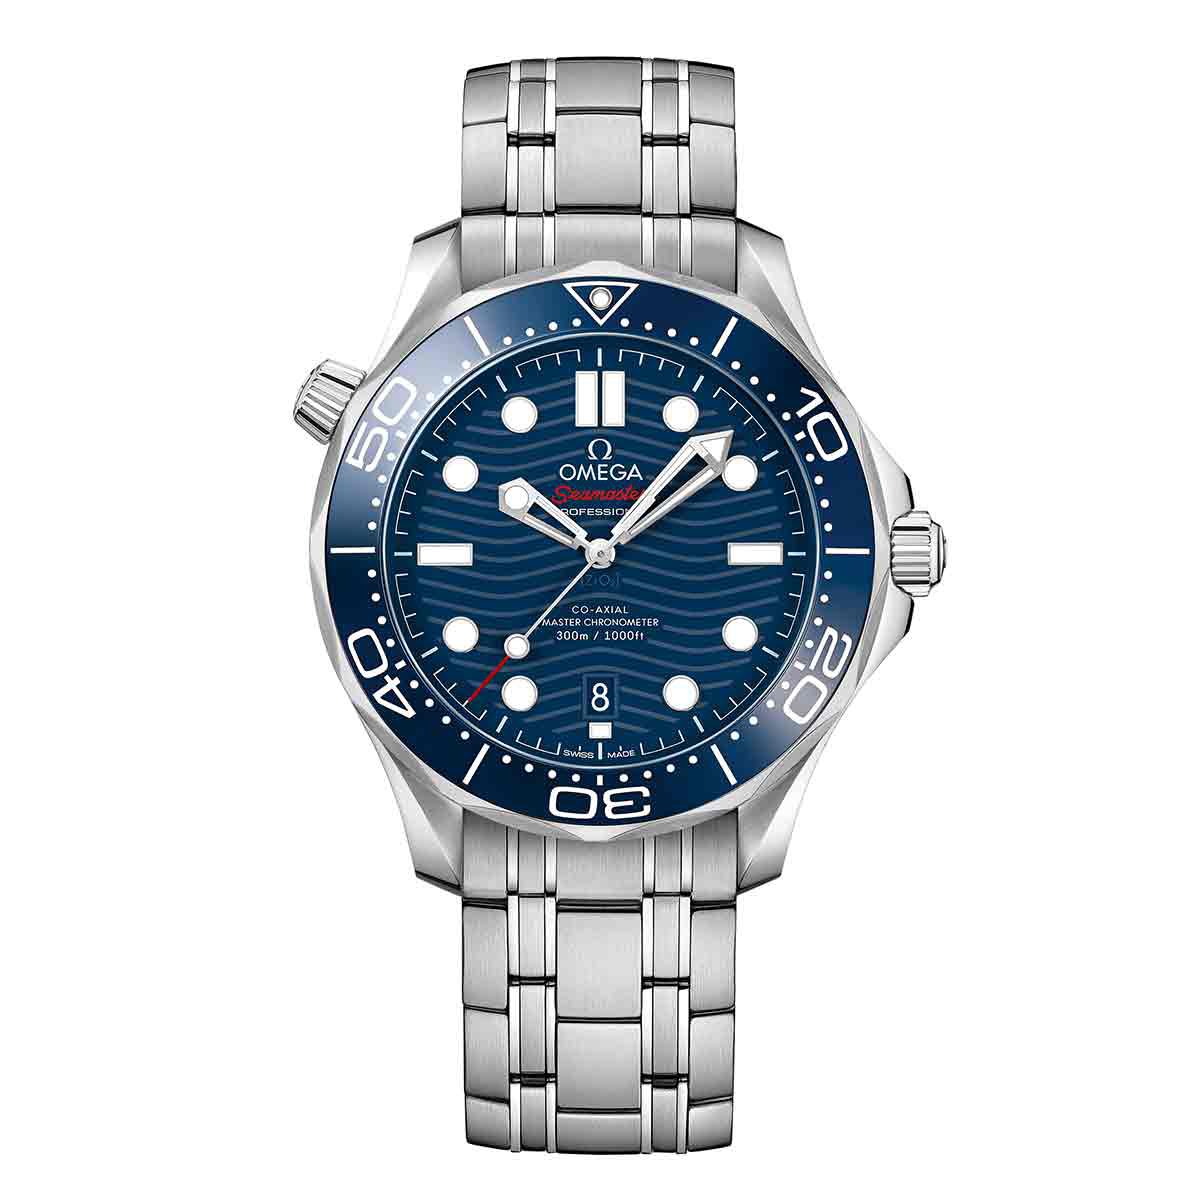 OMEGA Seamaster DIVER 300M CO-AXIAL MASTER CHRONOMETER 42 mm